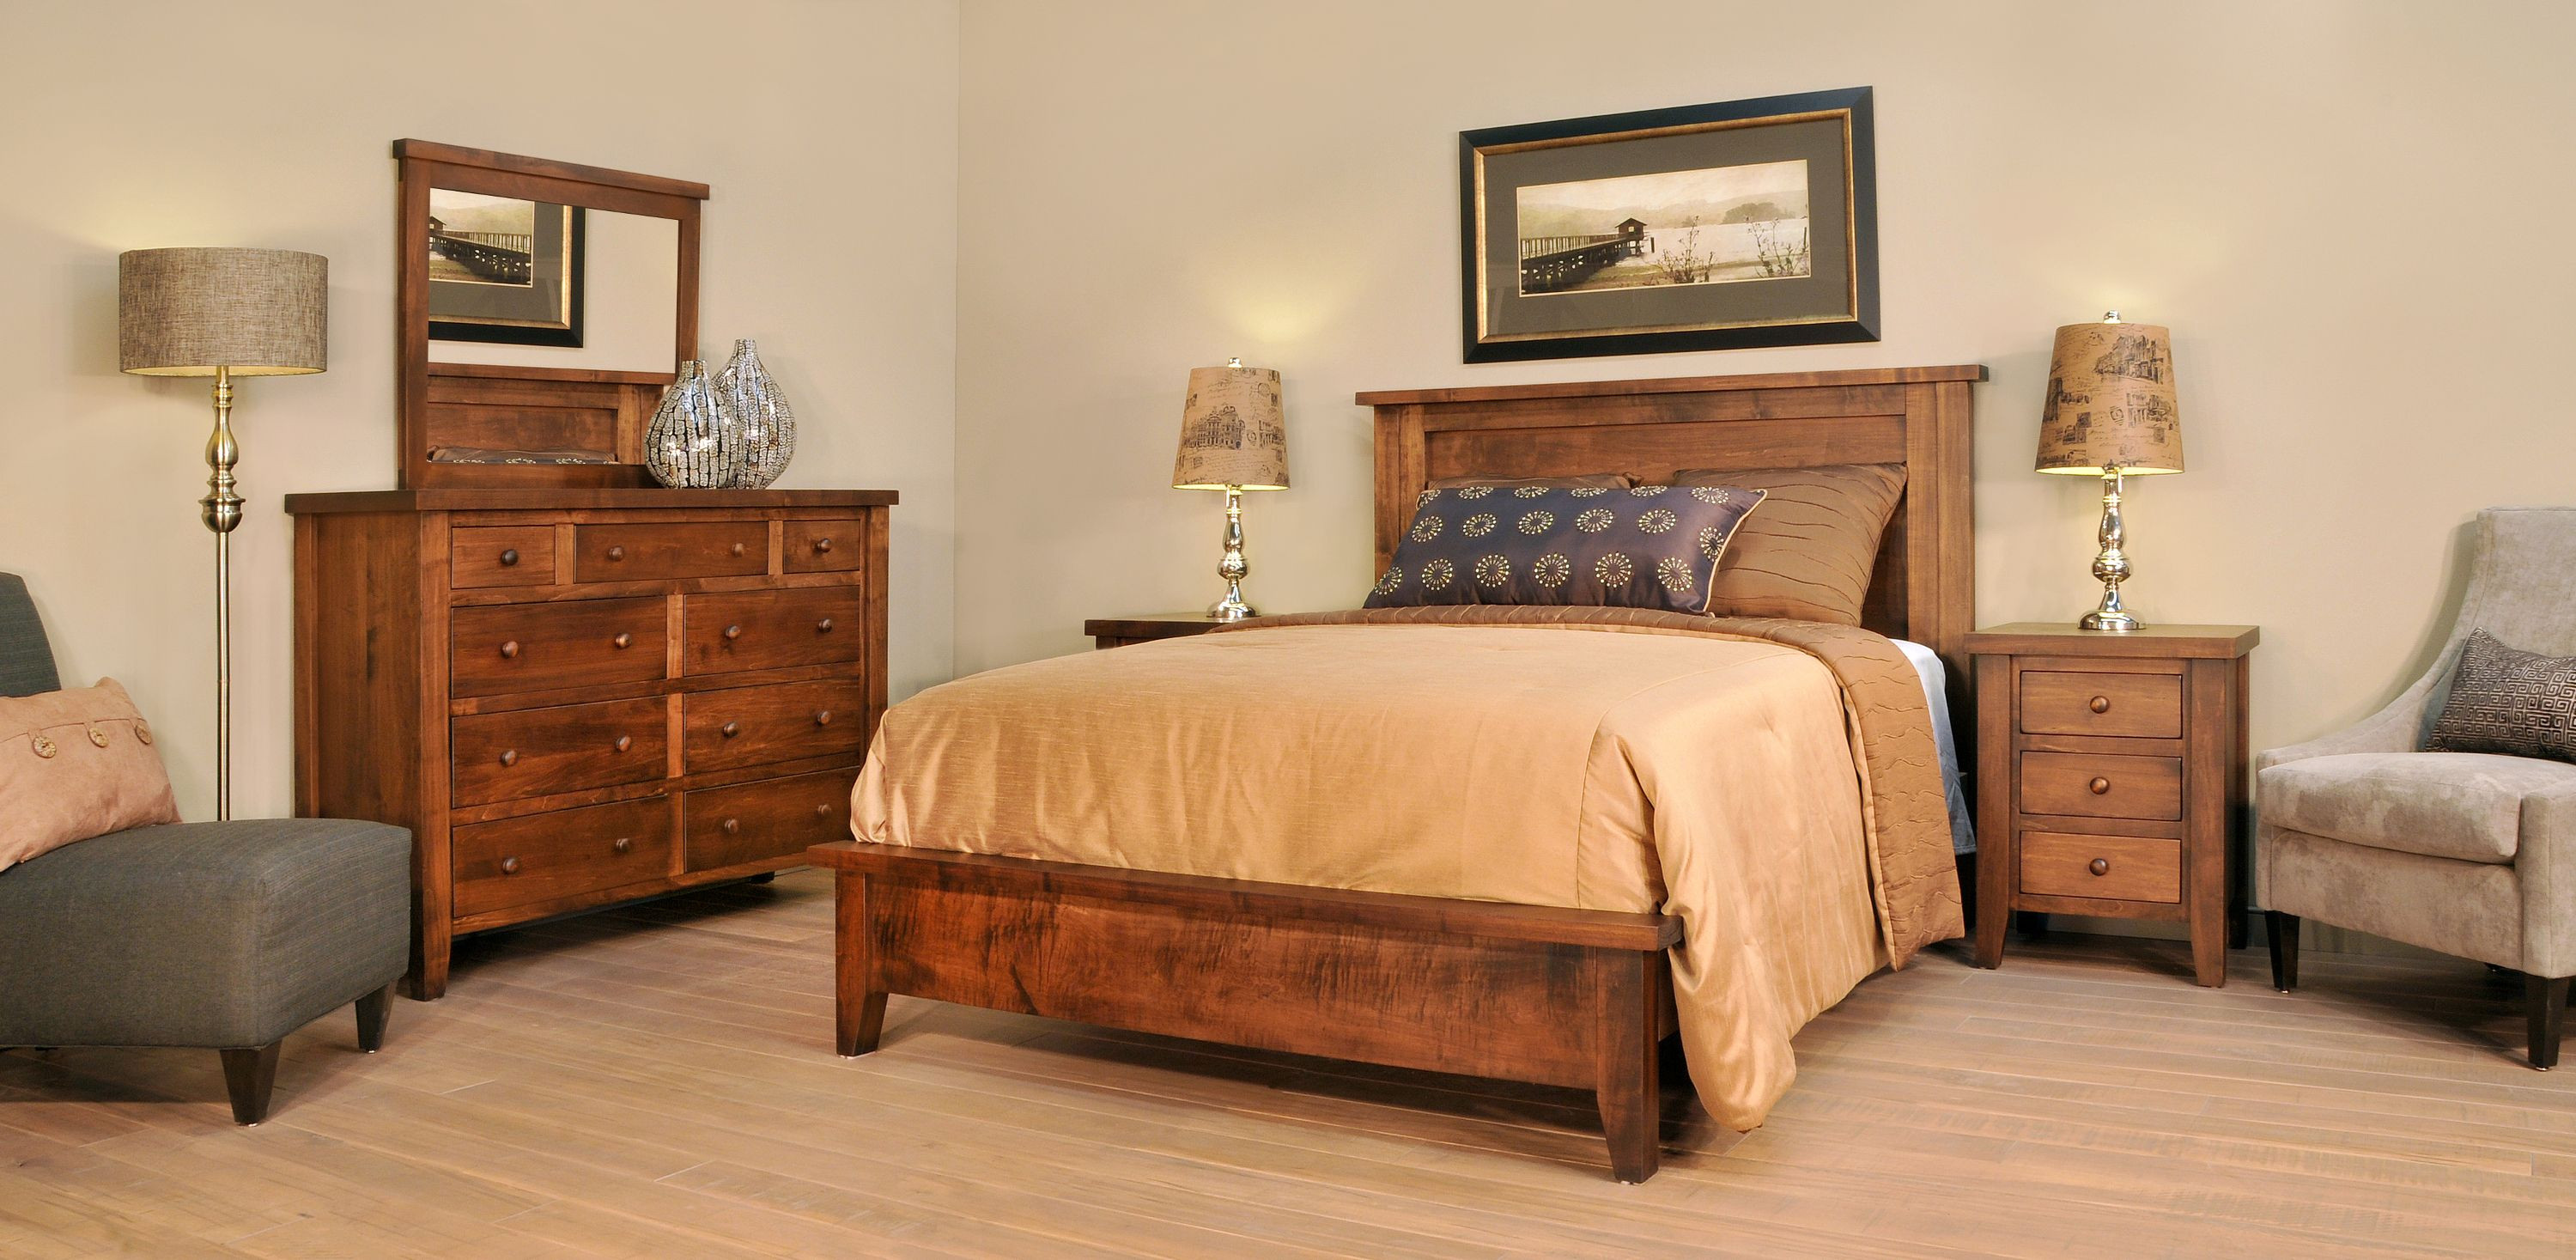 Ruff Sawn Farmhouse Bedroom Collection